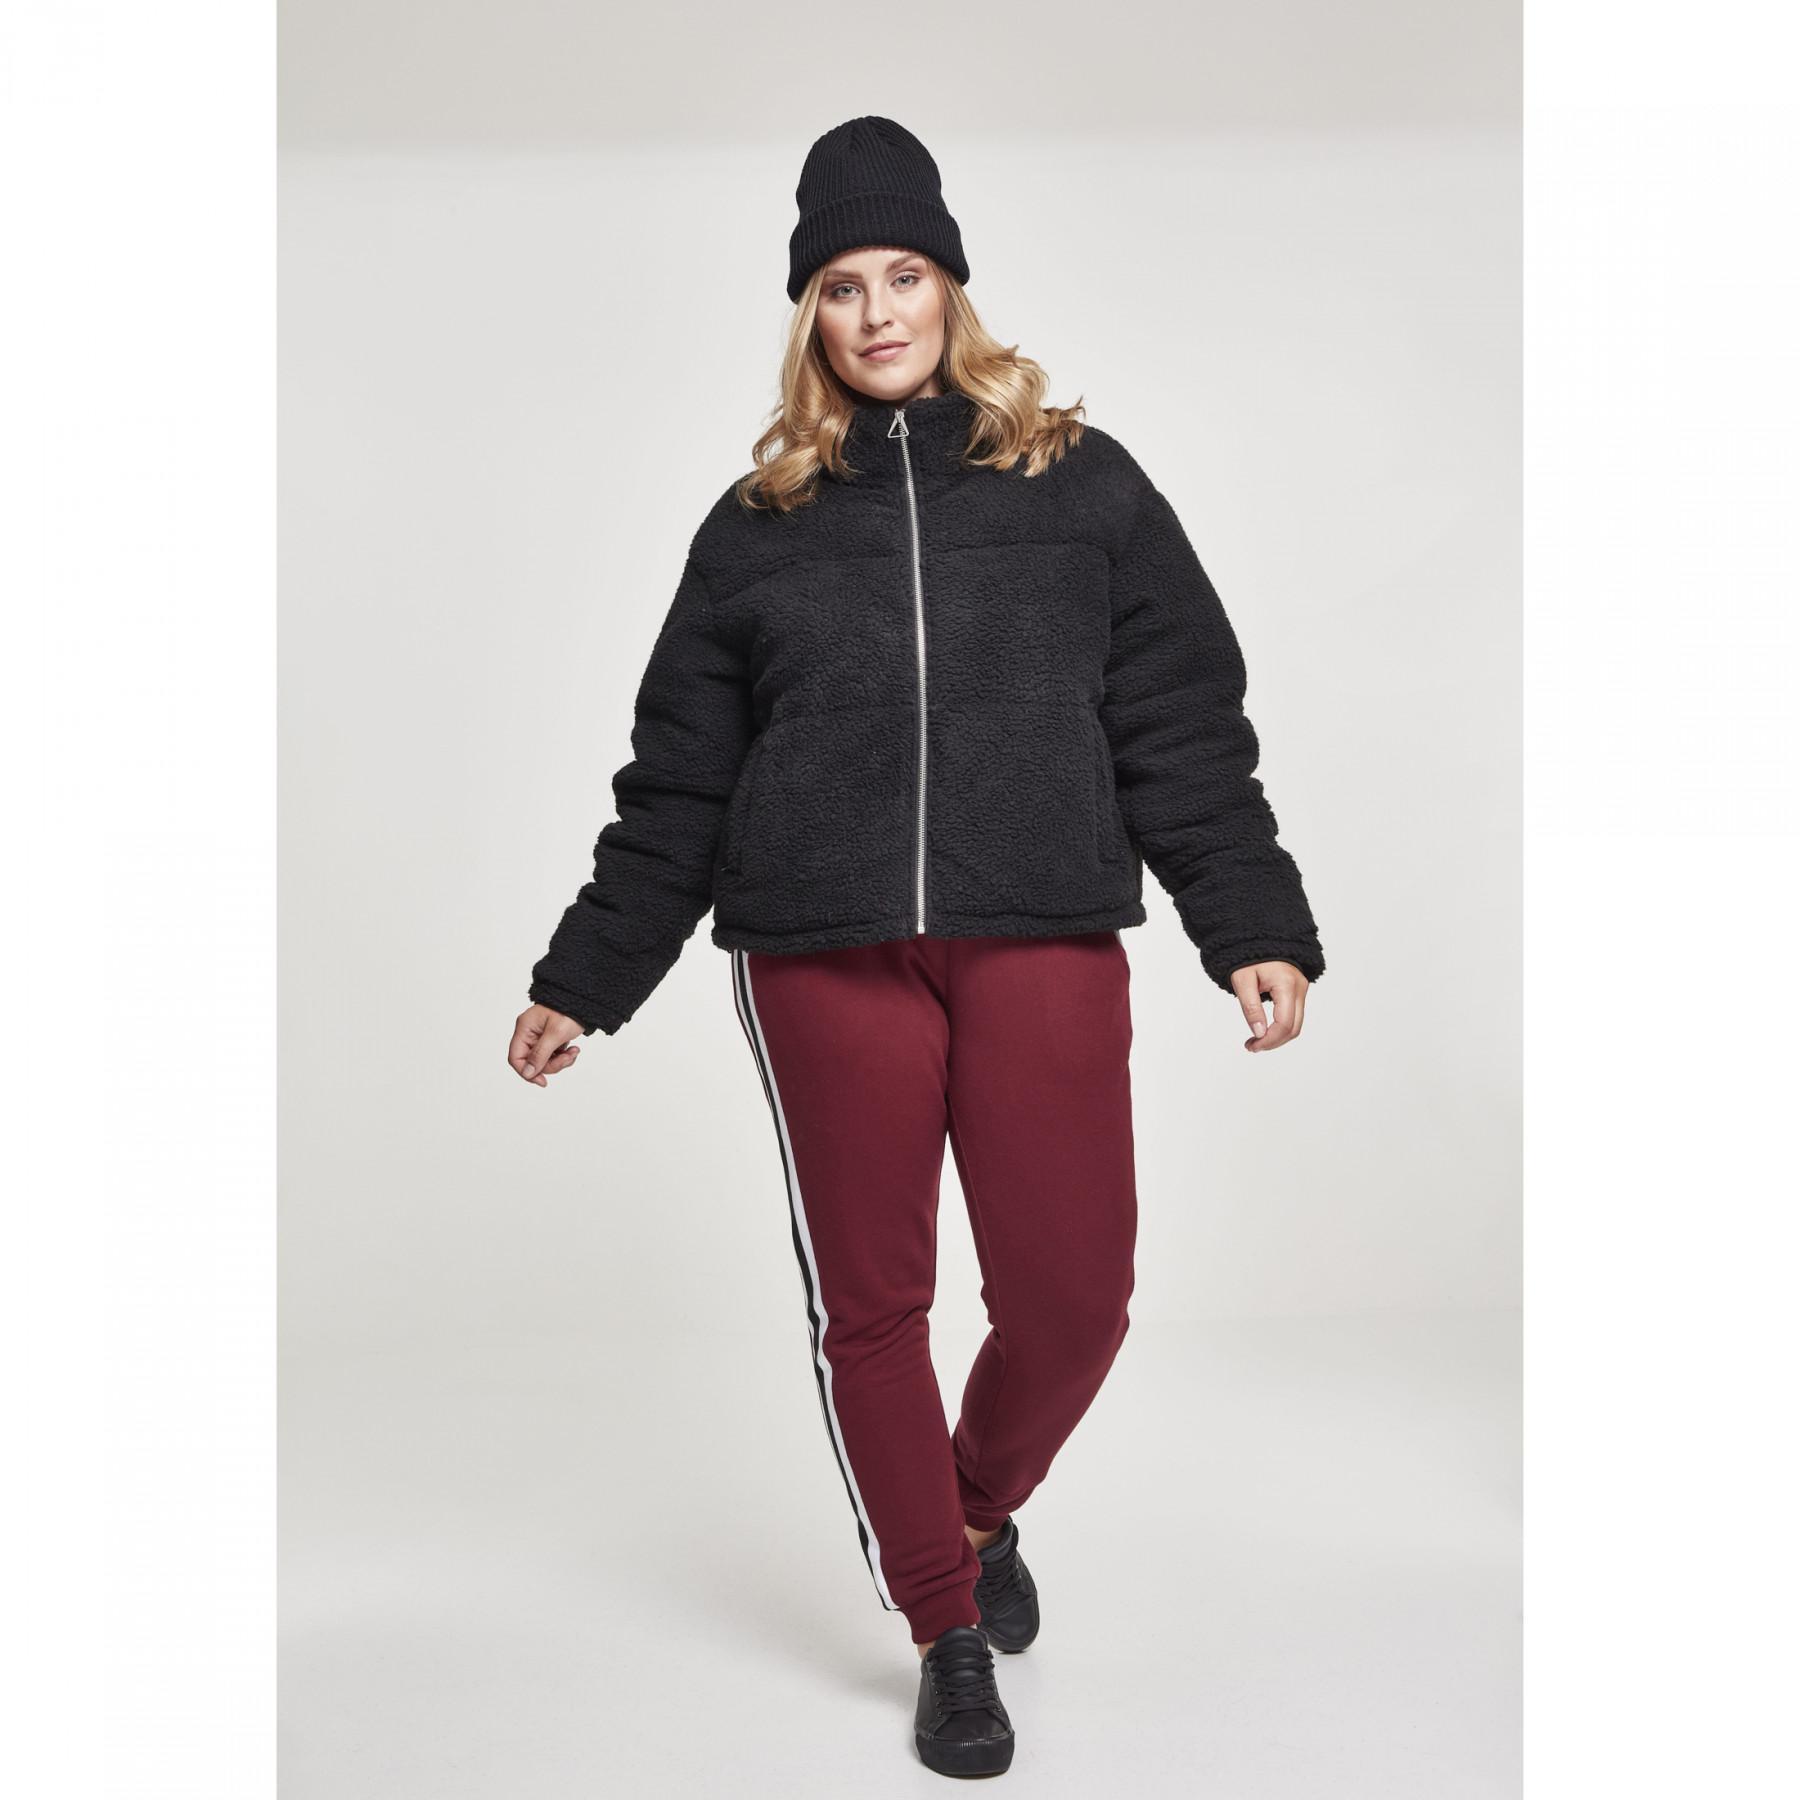 Parka femme grandes tailles Urban Classic boxy herpa